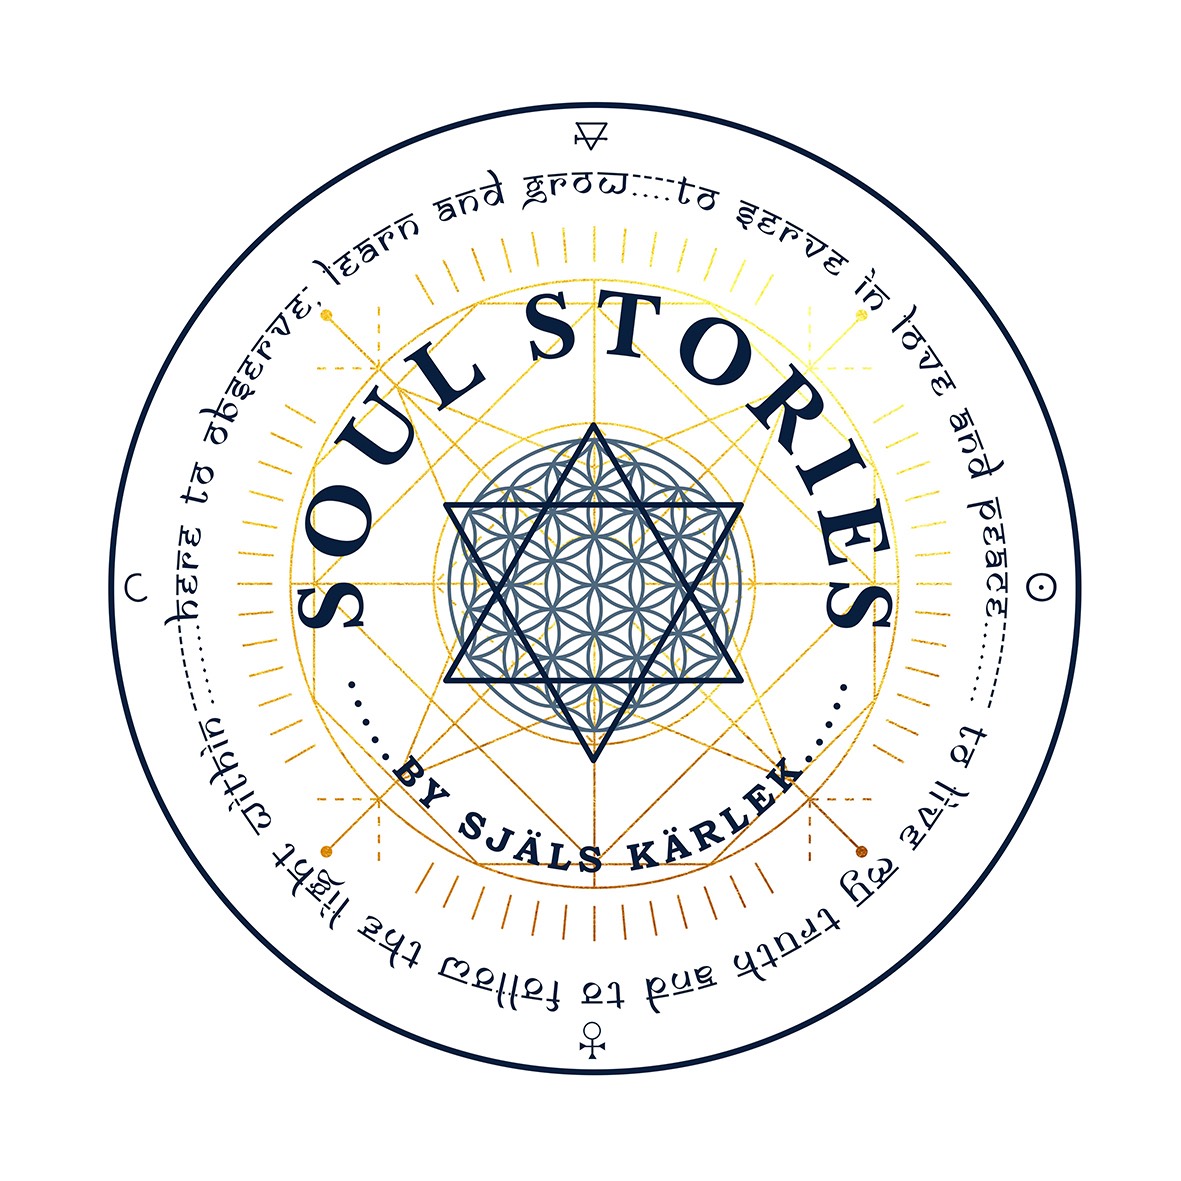 SOUL STORIES BY SJÄLS KÄRLEK  here to observe, learn and grow, to serve in love and peace, to live my truth and to follow the light within